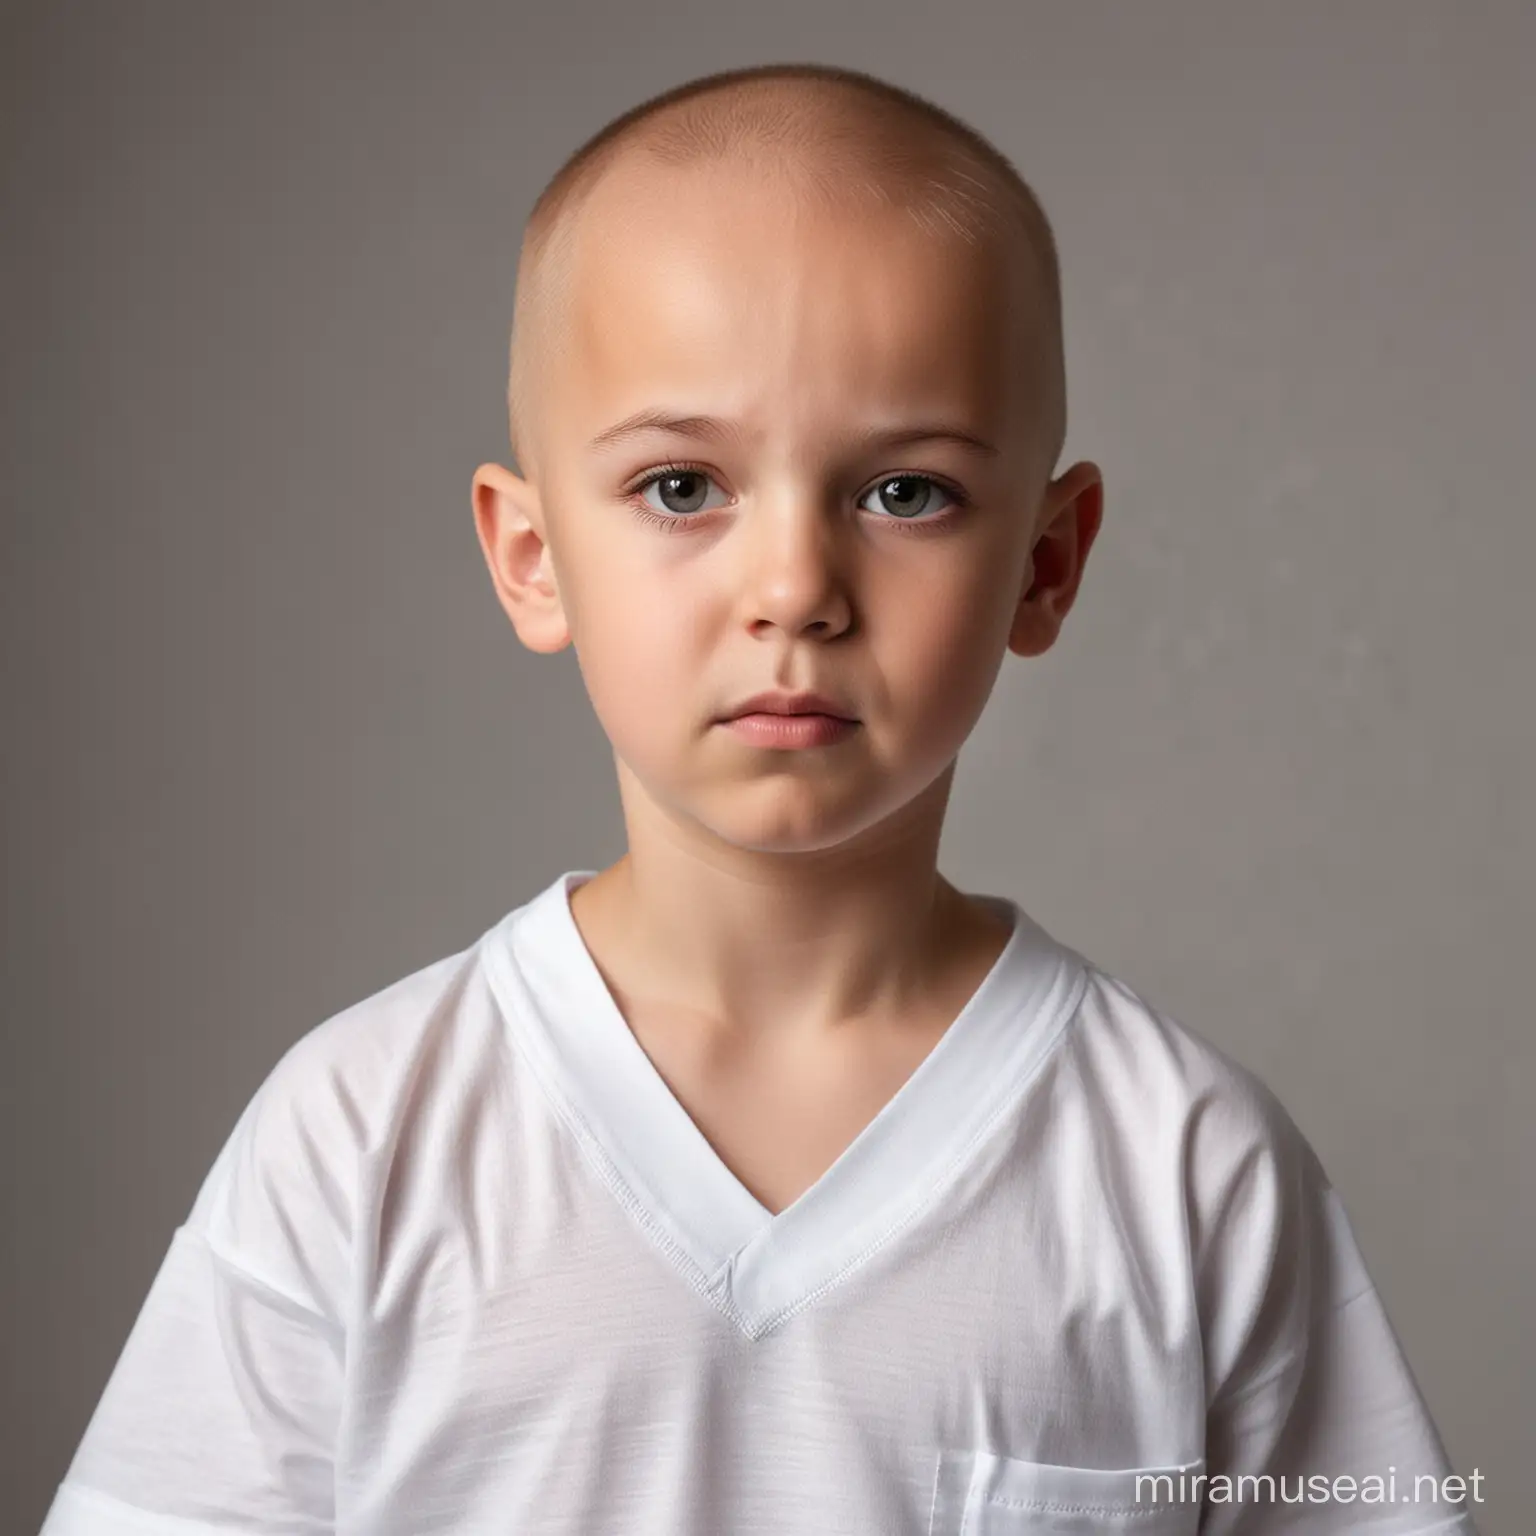 a serious face young cute boy having cancer wearing white v neck hospital shirt , bald ,seeking for donations
